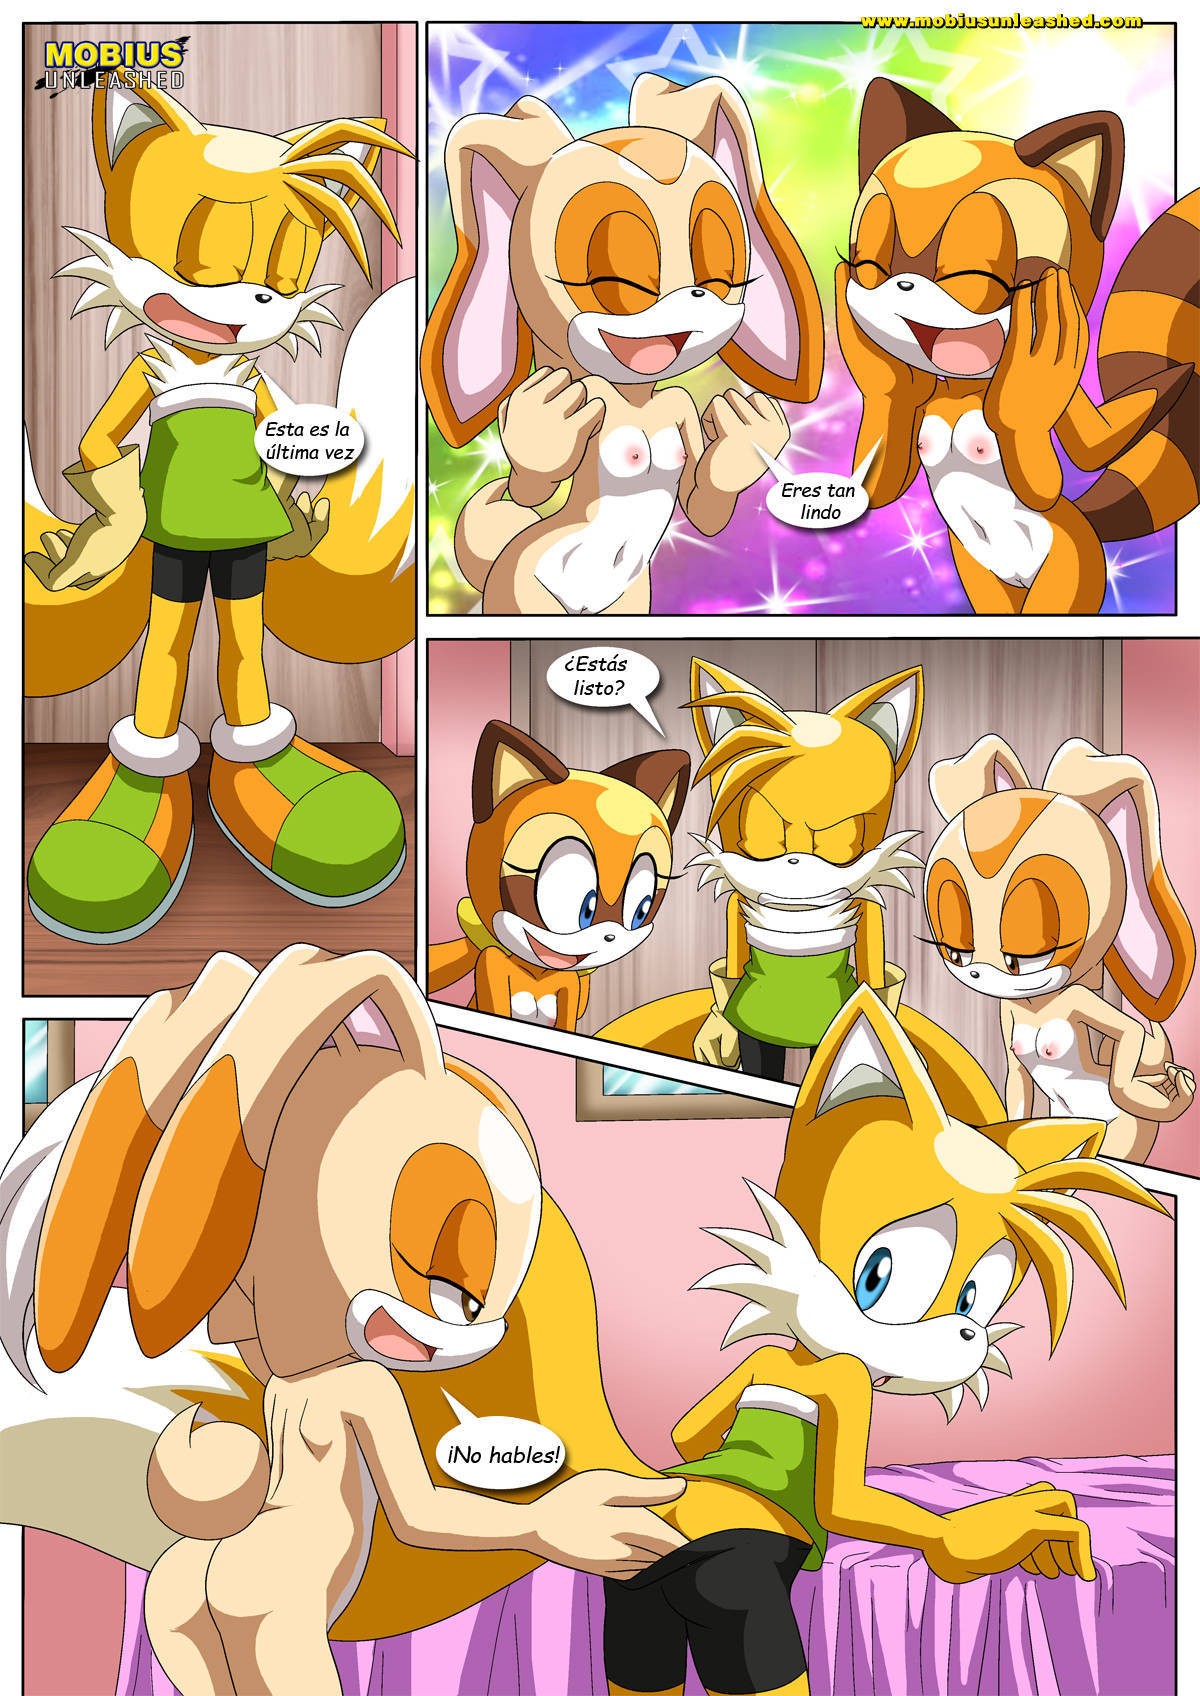 Tails and Cream - 6